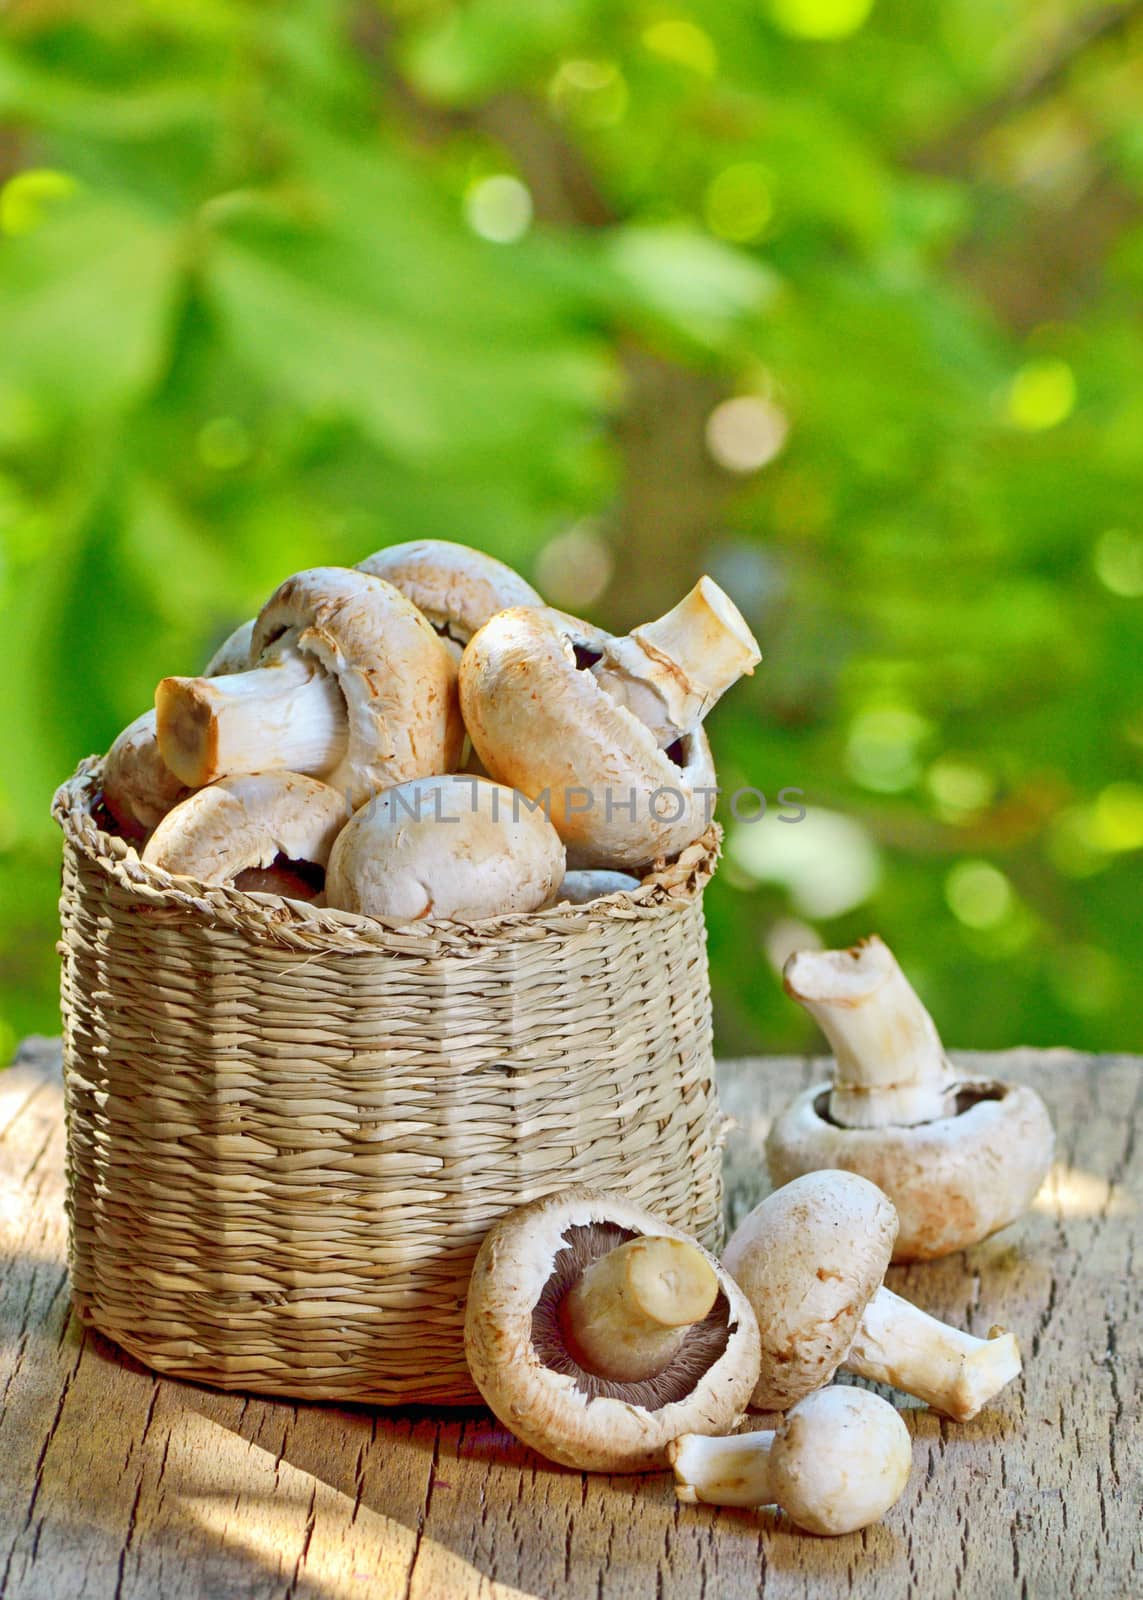 mushrooms in a basket on a wooden background